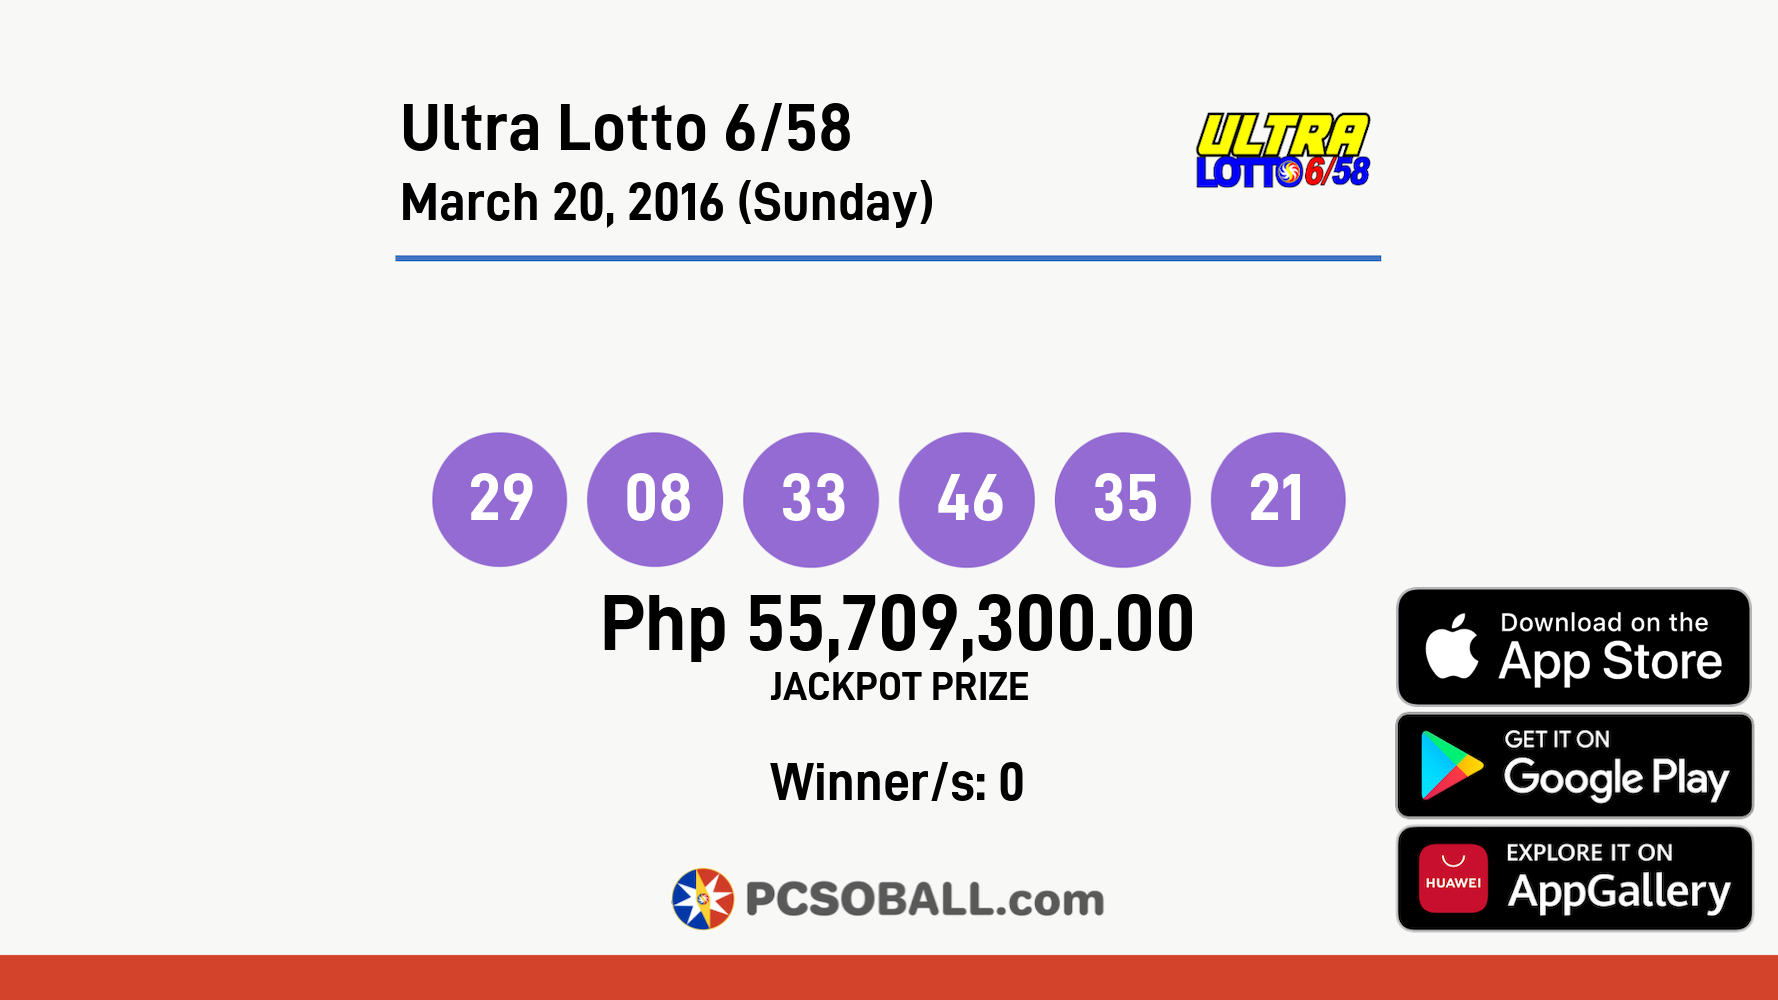 Ultra Lotto 6/58 March 20, 2016 (Sunday) Result